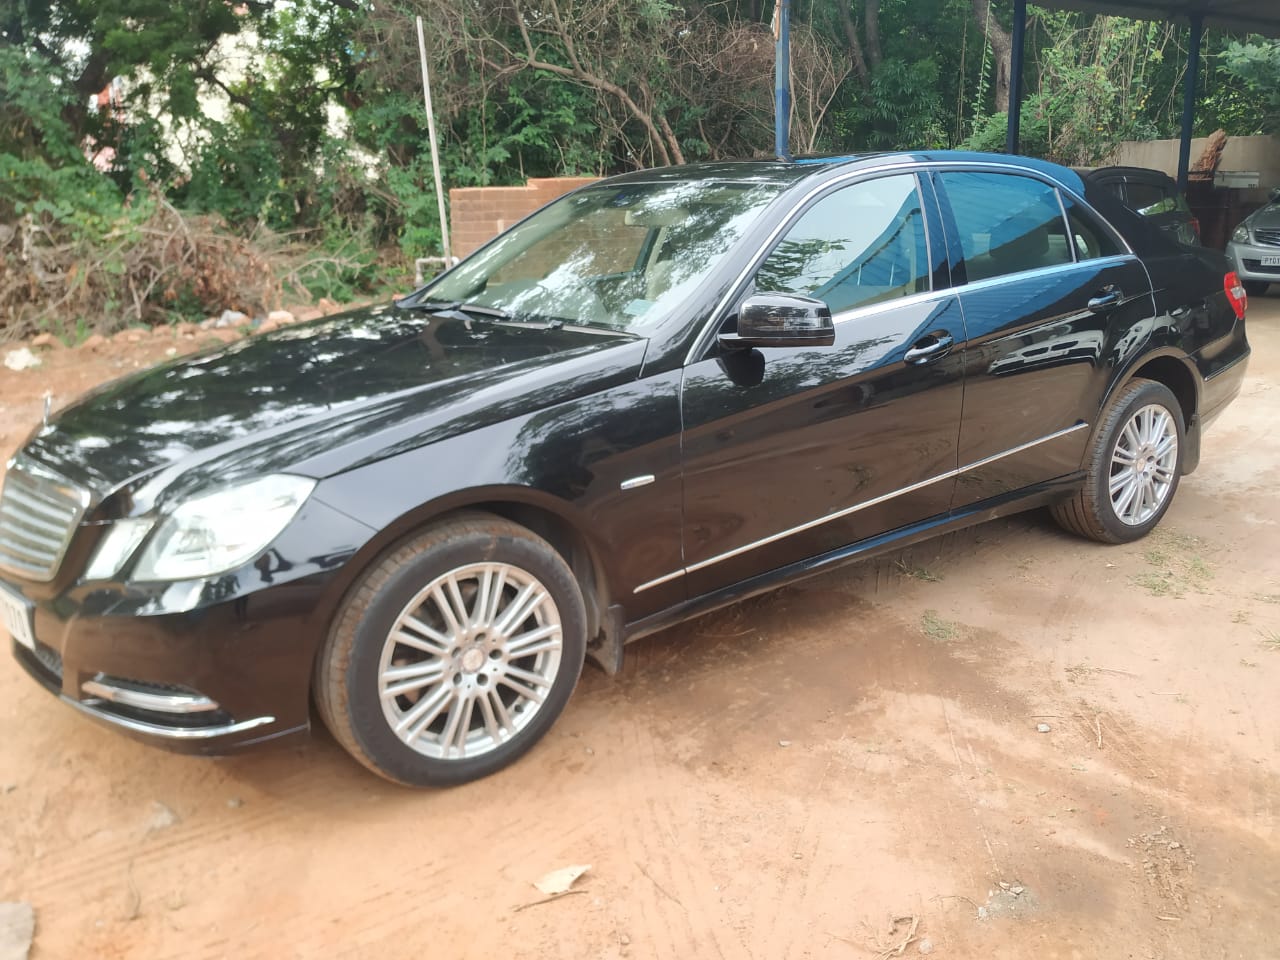 3703-for-sale-Mercedes-Benz-E-Class-Diesel-First-Owner-2012-TN-registered-rs-1399999